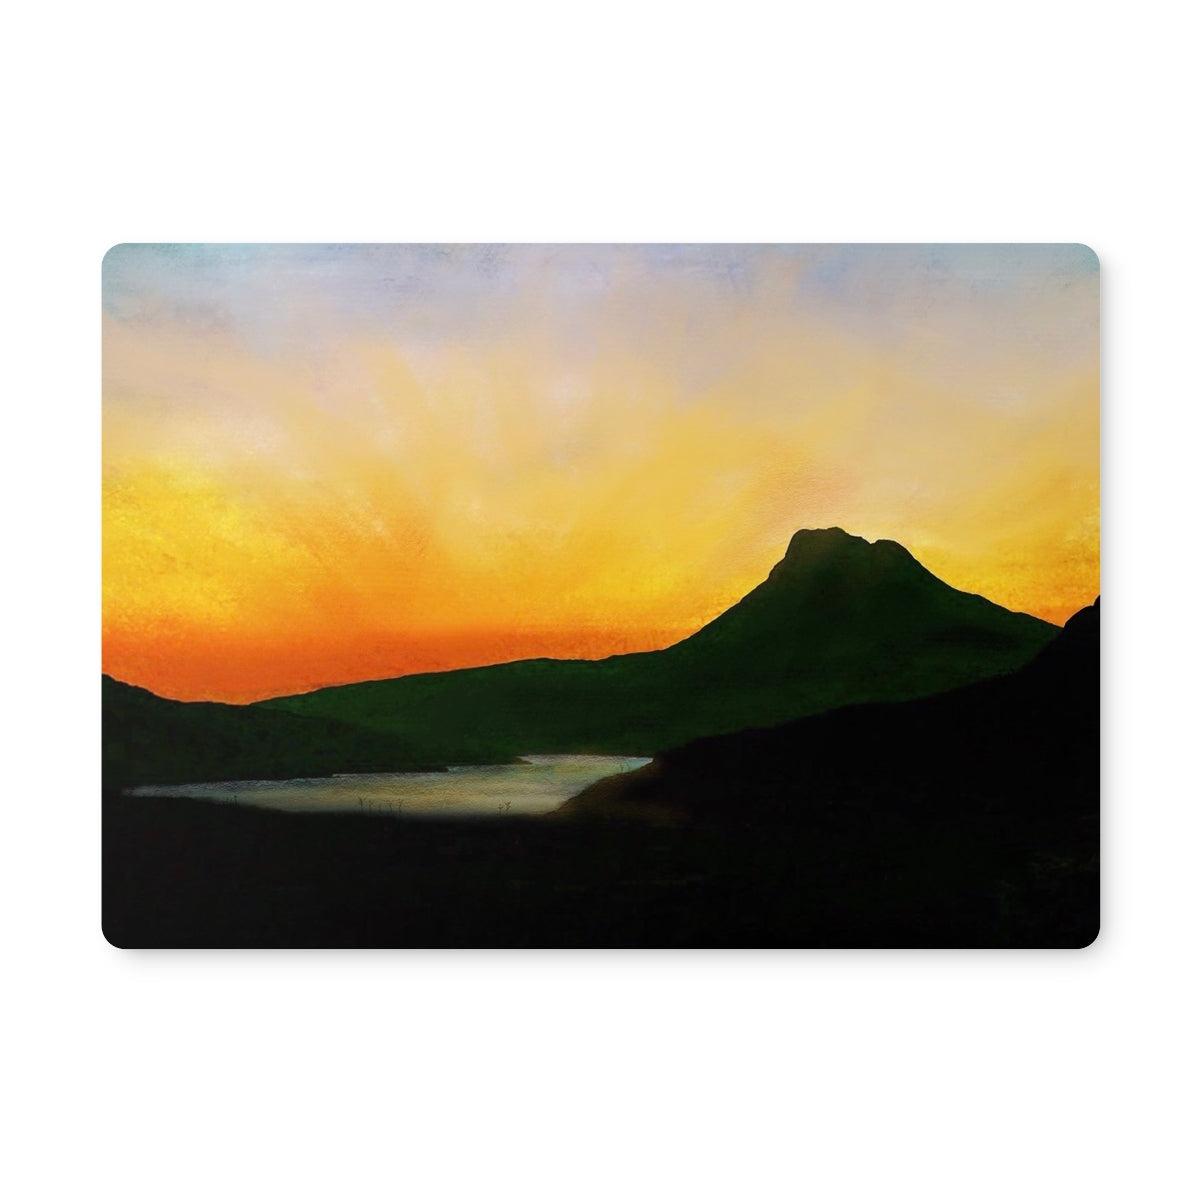 Stac Pollaidh Dusk Art Gifts Placemat-Placemats-Scottish Lochs & Mountains Art Gallery-2 Placemats-Paintings, Prints, Homeware, Art Gifts From Scotland By Scottish Artist Kevin Hunter